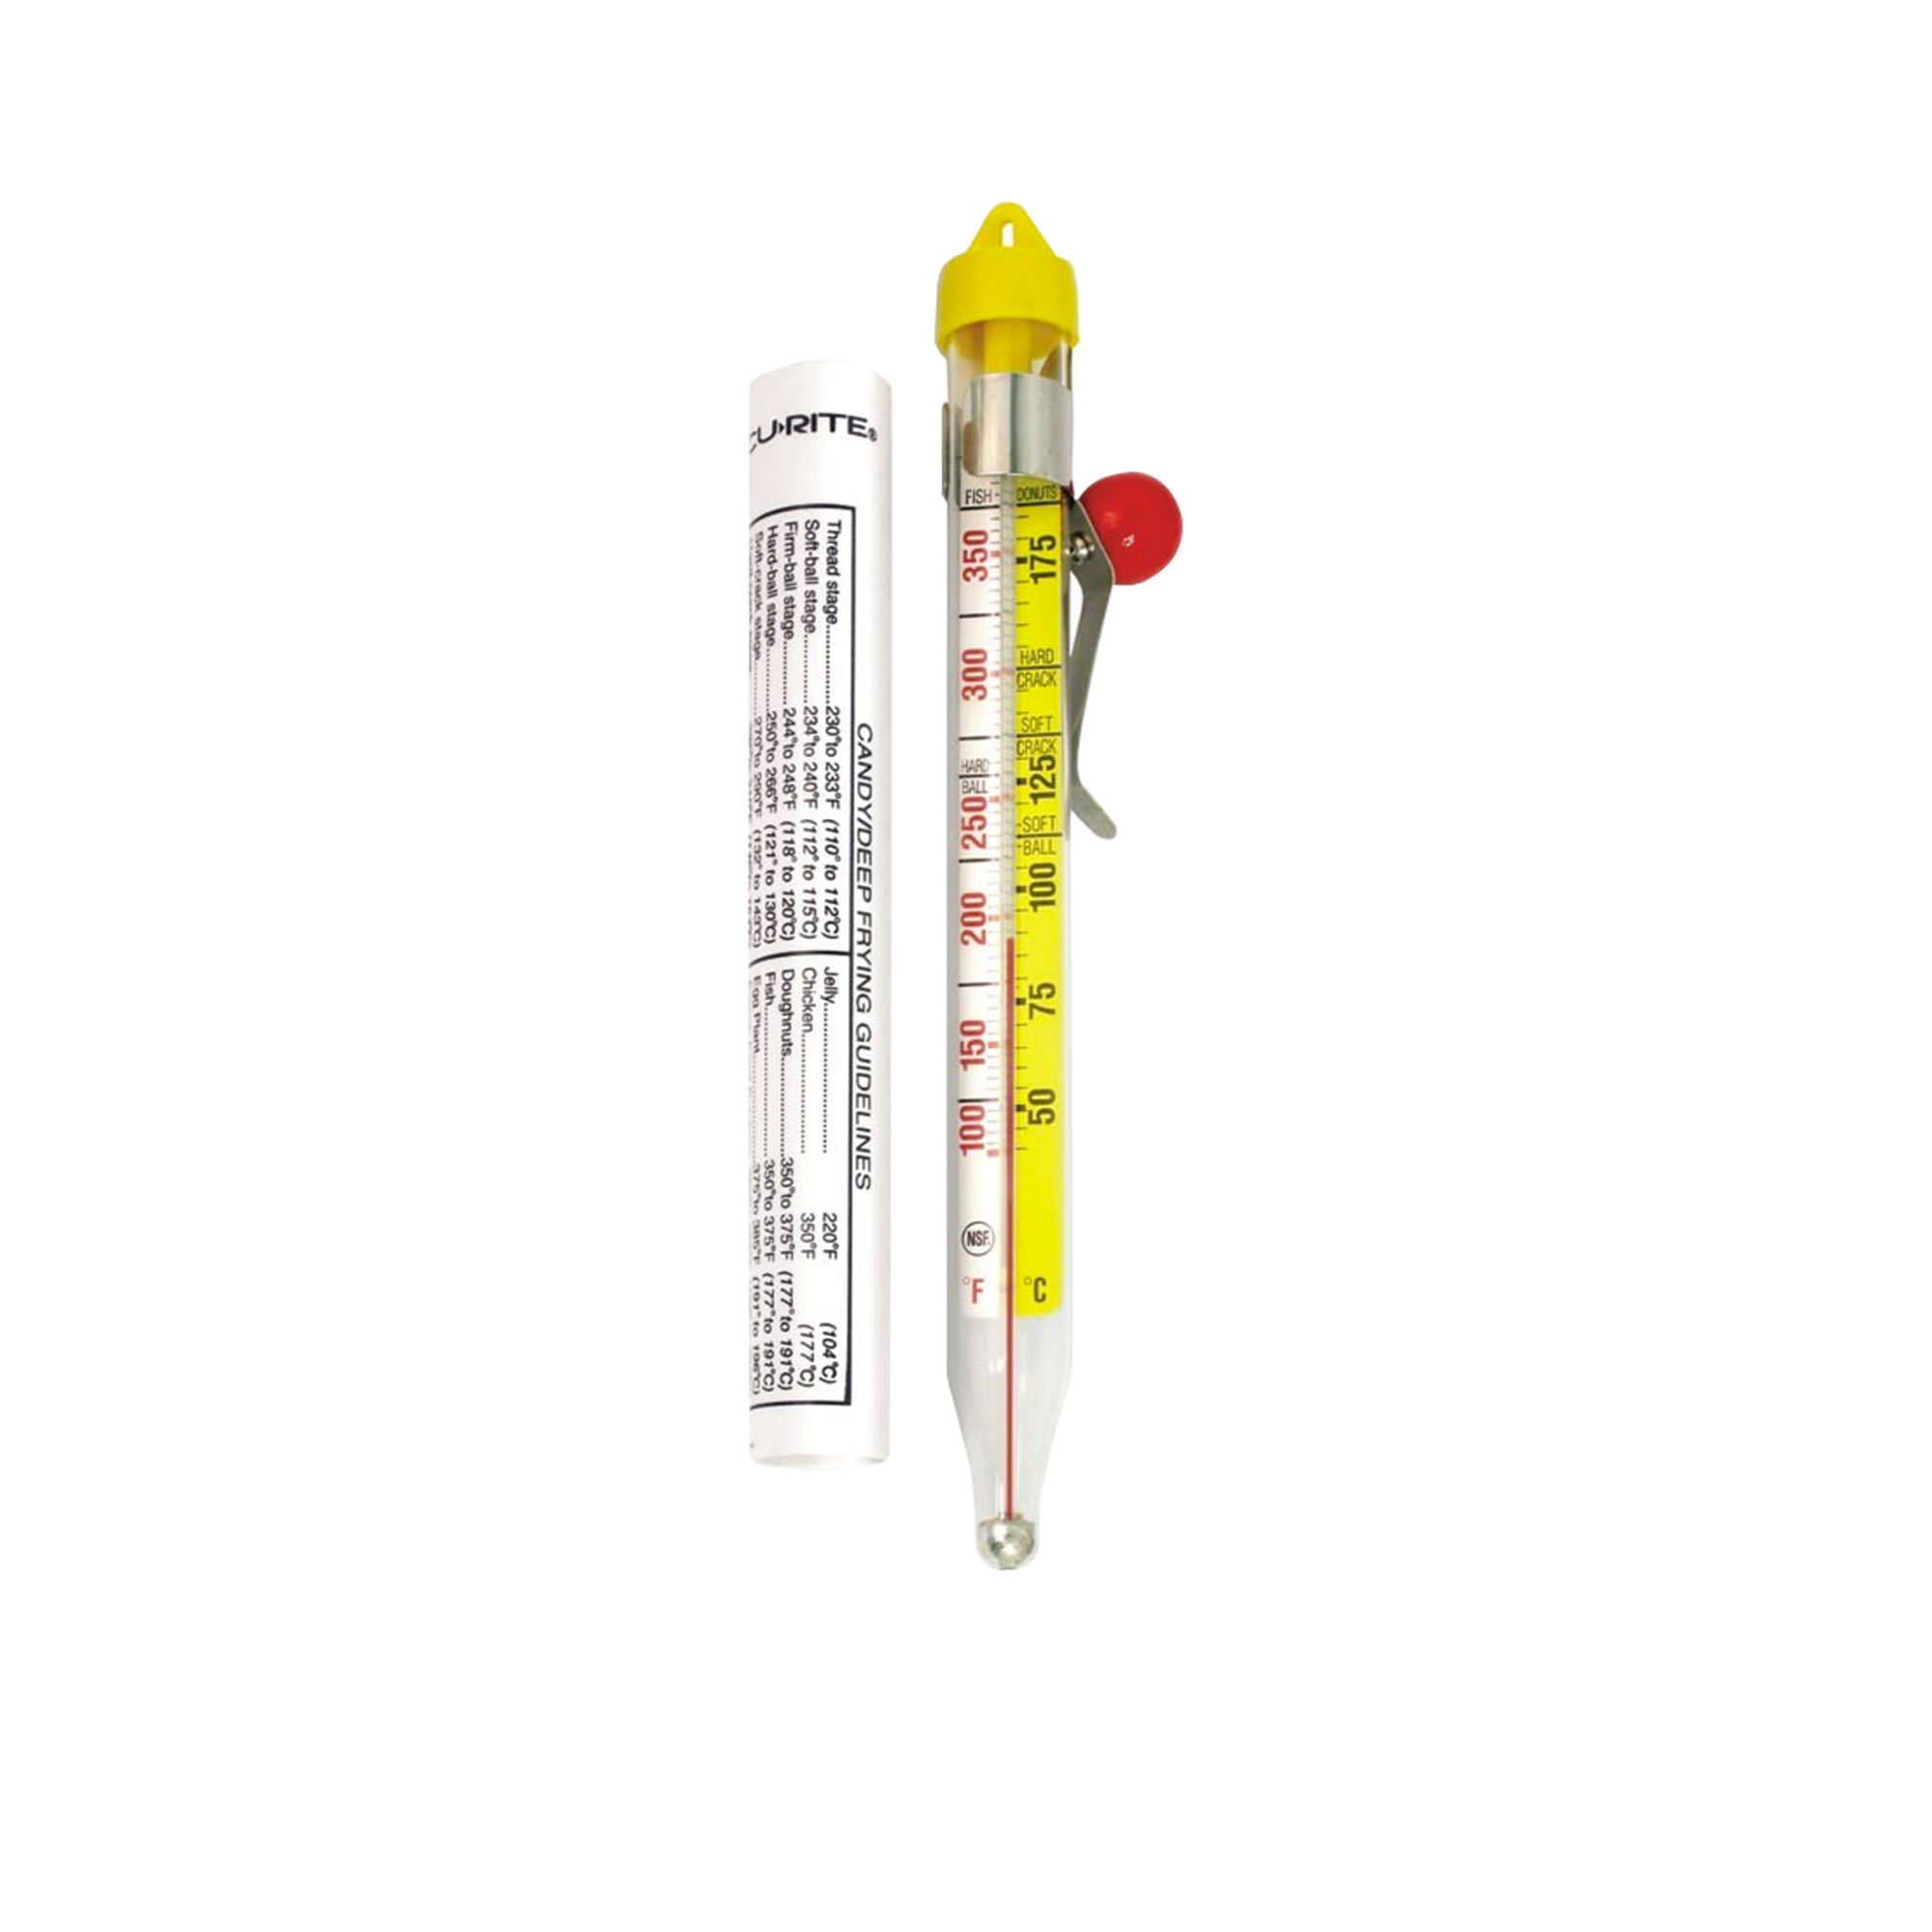 Acurite Deluxe Candy/Deep Fry Thermometer with Sheath Image 1